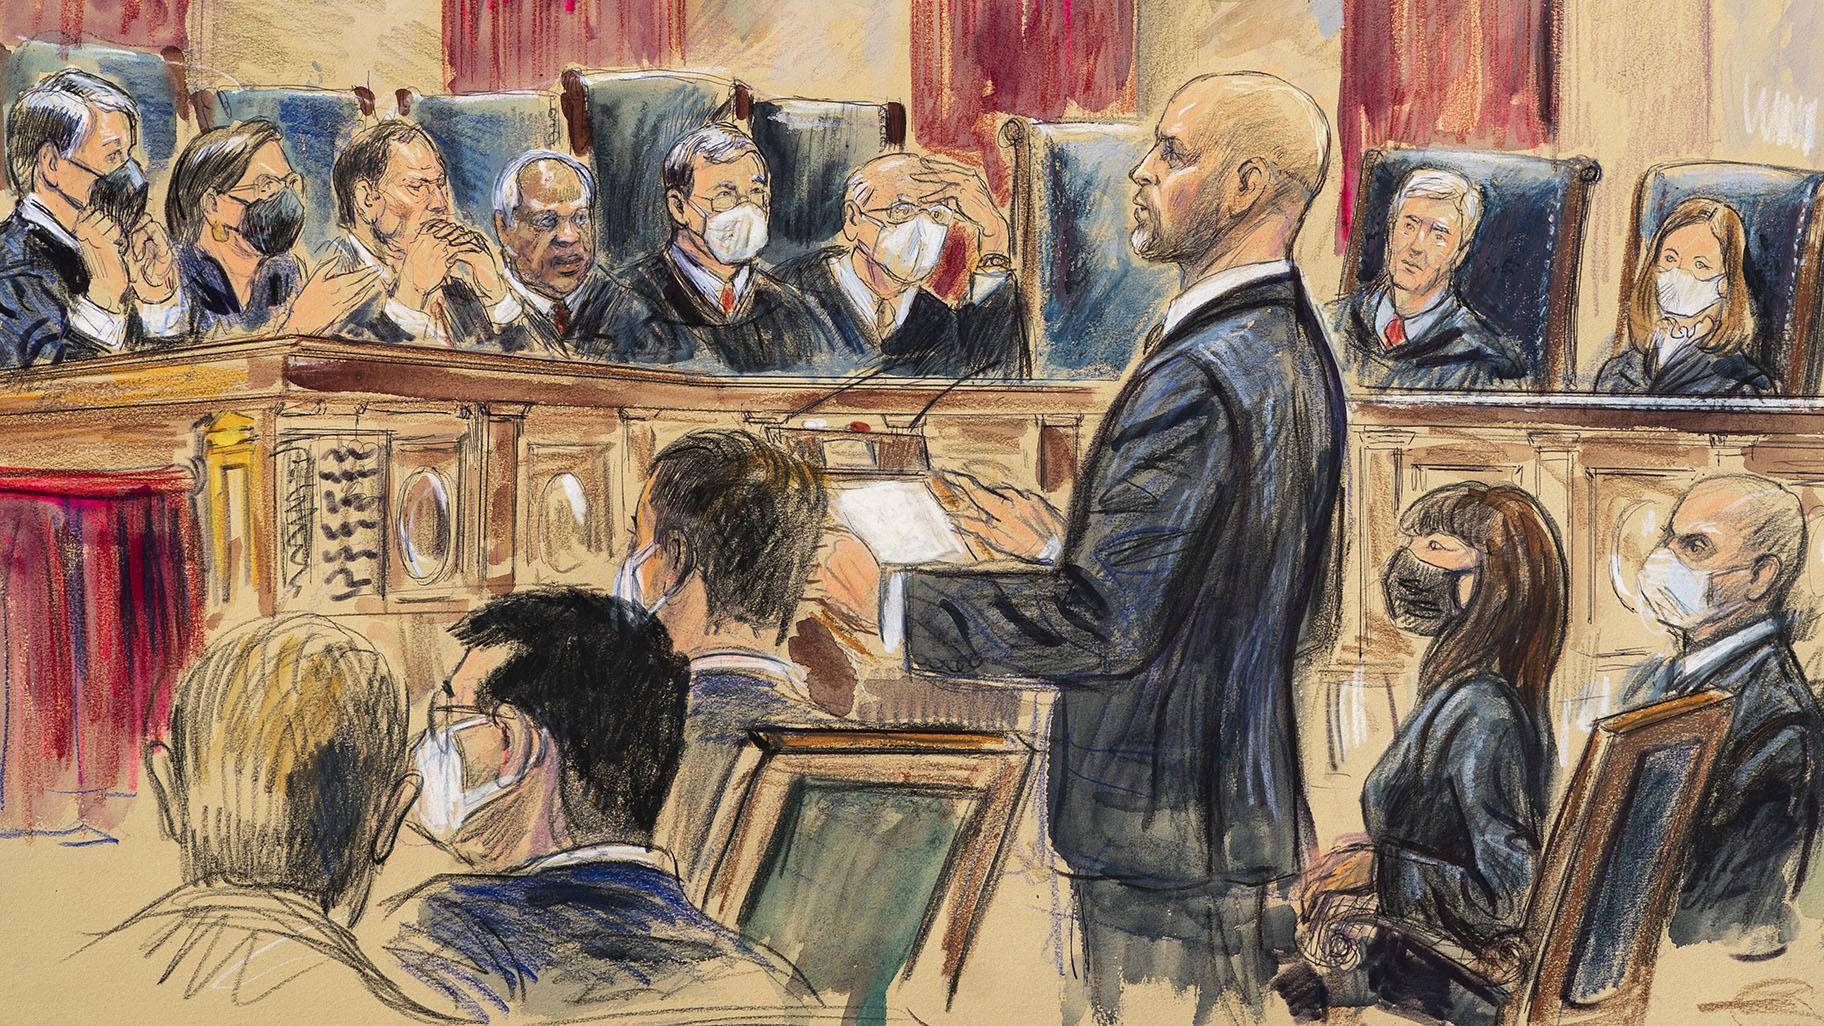 This artist sketch depicts lawyer Scott Keller standing to argue on behalf of more than two dozen business groups seeking an immediate order from the Supreme Court to halt a Biden administration order to impose a vaccine-or-testing requirement on the nation's large employers during the COVID-19 pandemic, at the Supreme Court in Washington, Jan. 7, 2022. (Dana Verkouteren via AP, File)